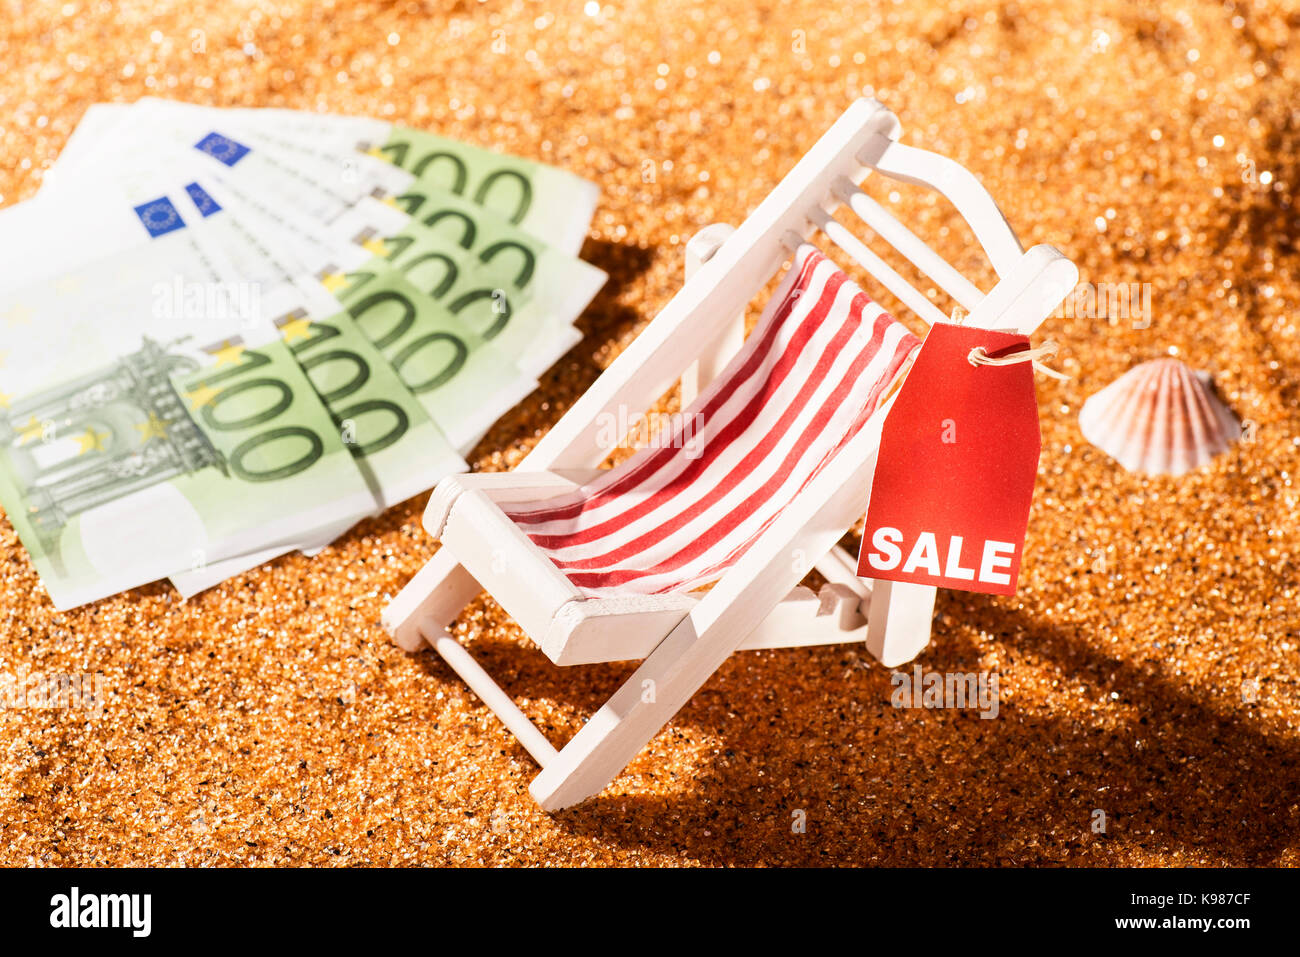 Deckchair on the beach, discount label with the word sale and bank notes Stock Photo